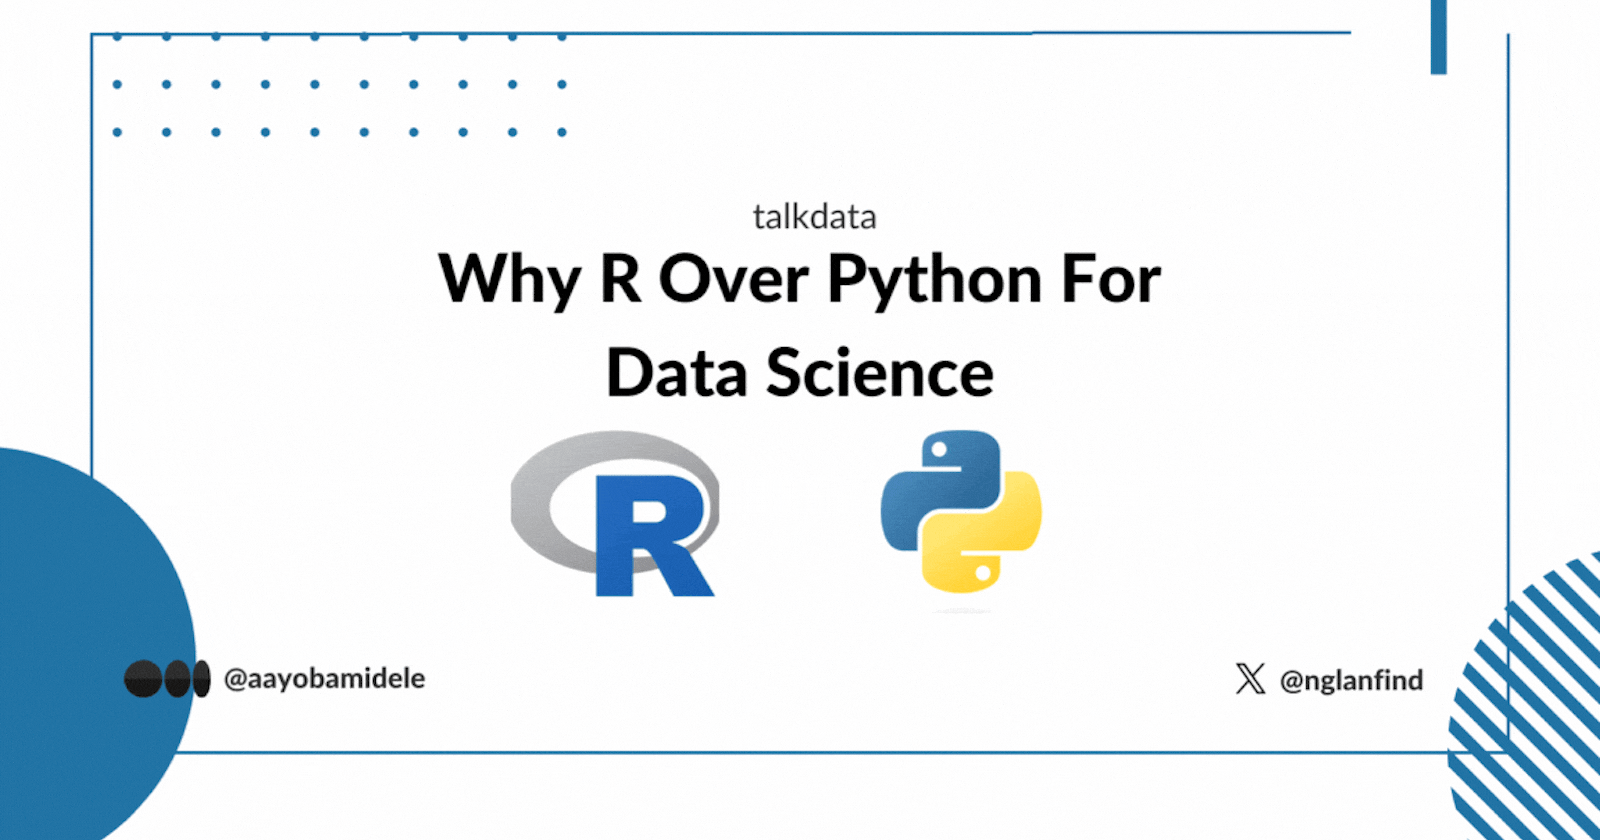 Why R over Python For Data Science